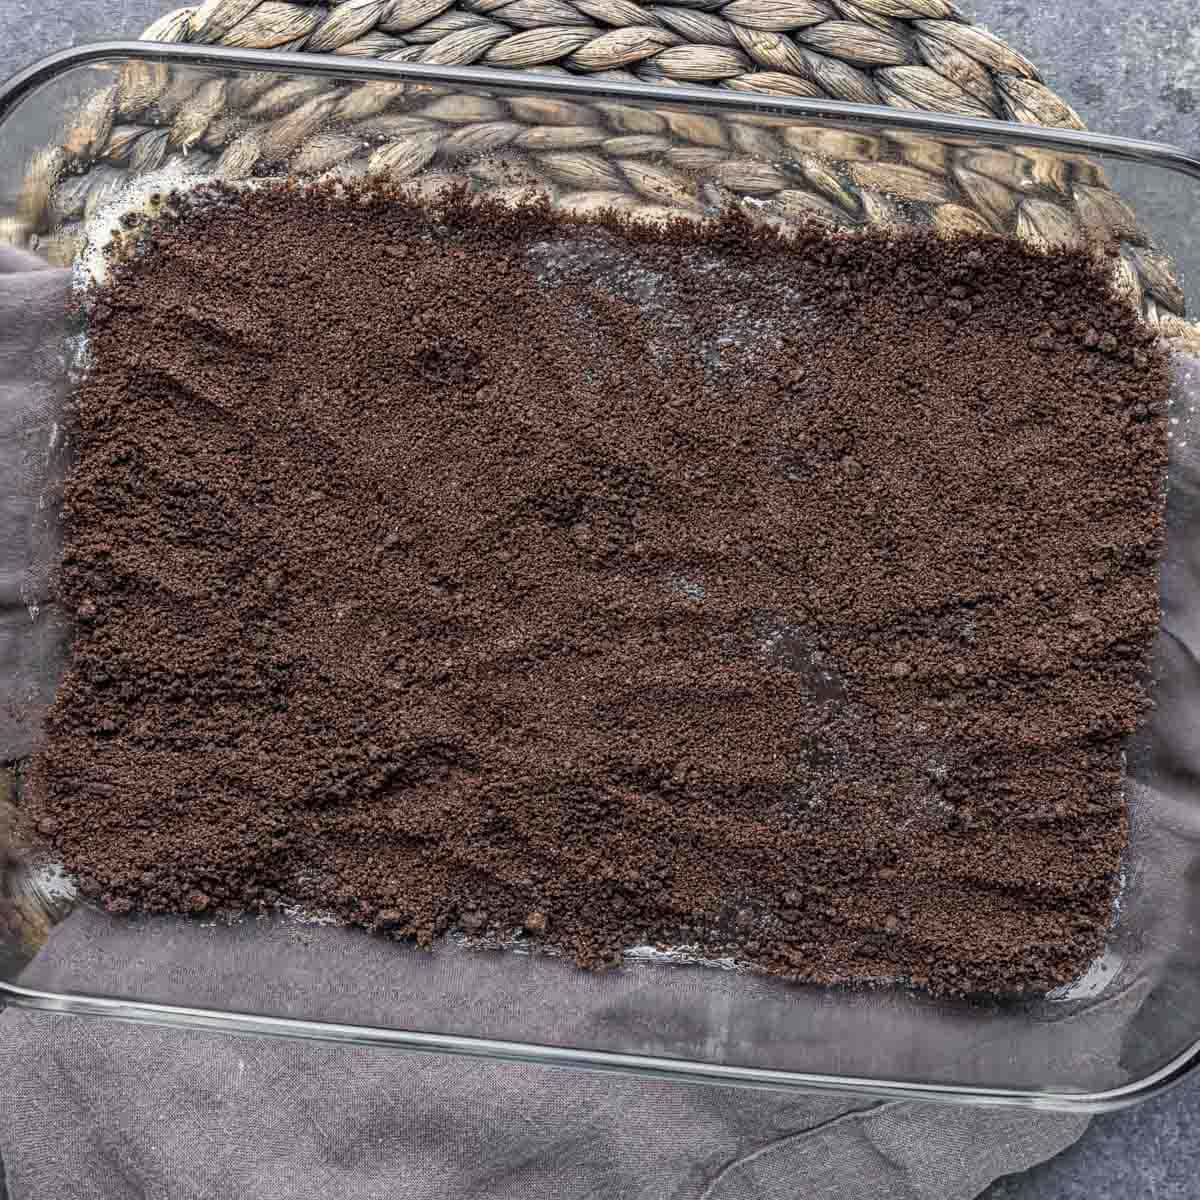 A baking dish filled with a mixture of crushed Oreo to make Oreo Magic Bars.